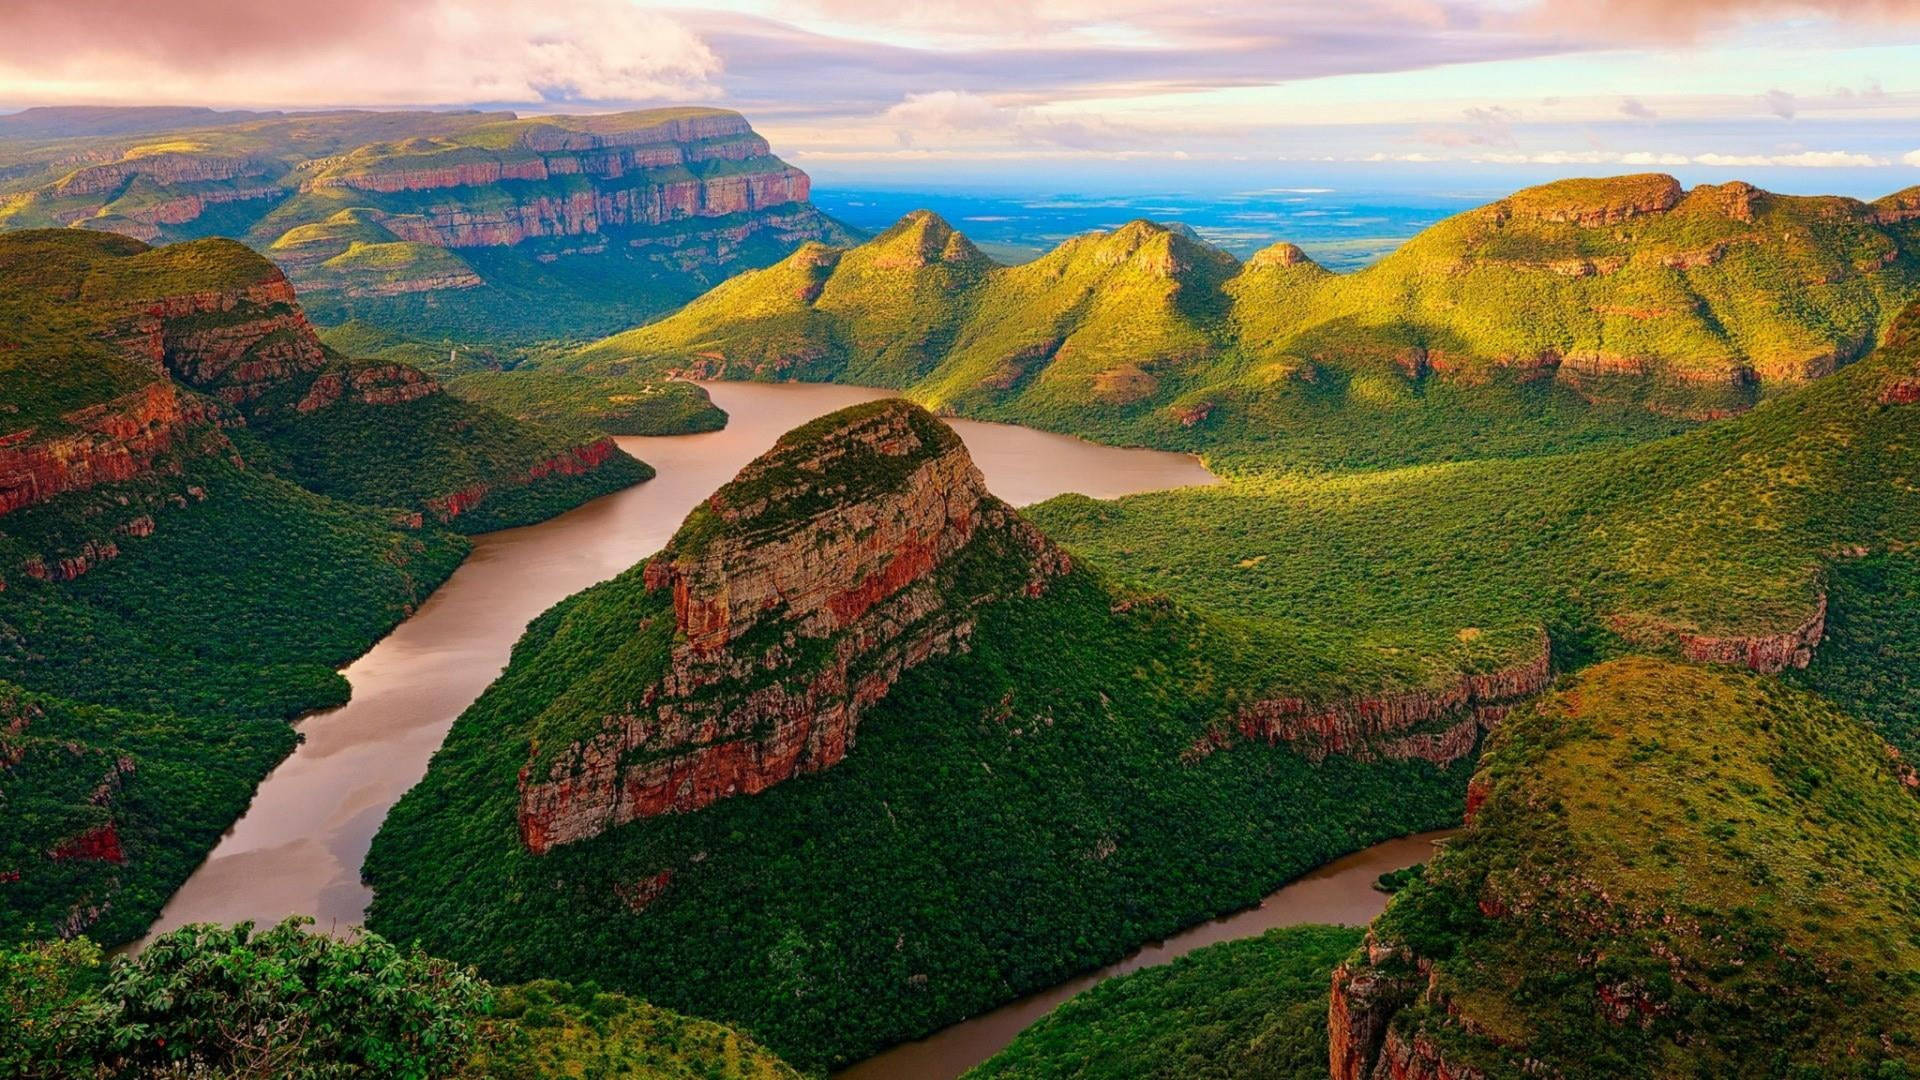 Blyderiver Canyon In Afrika Wallpaper